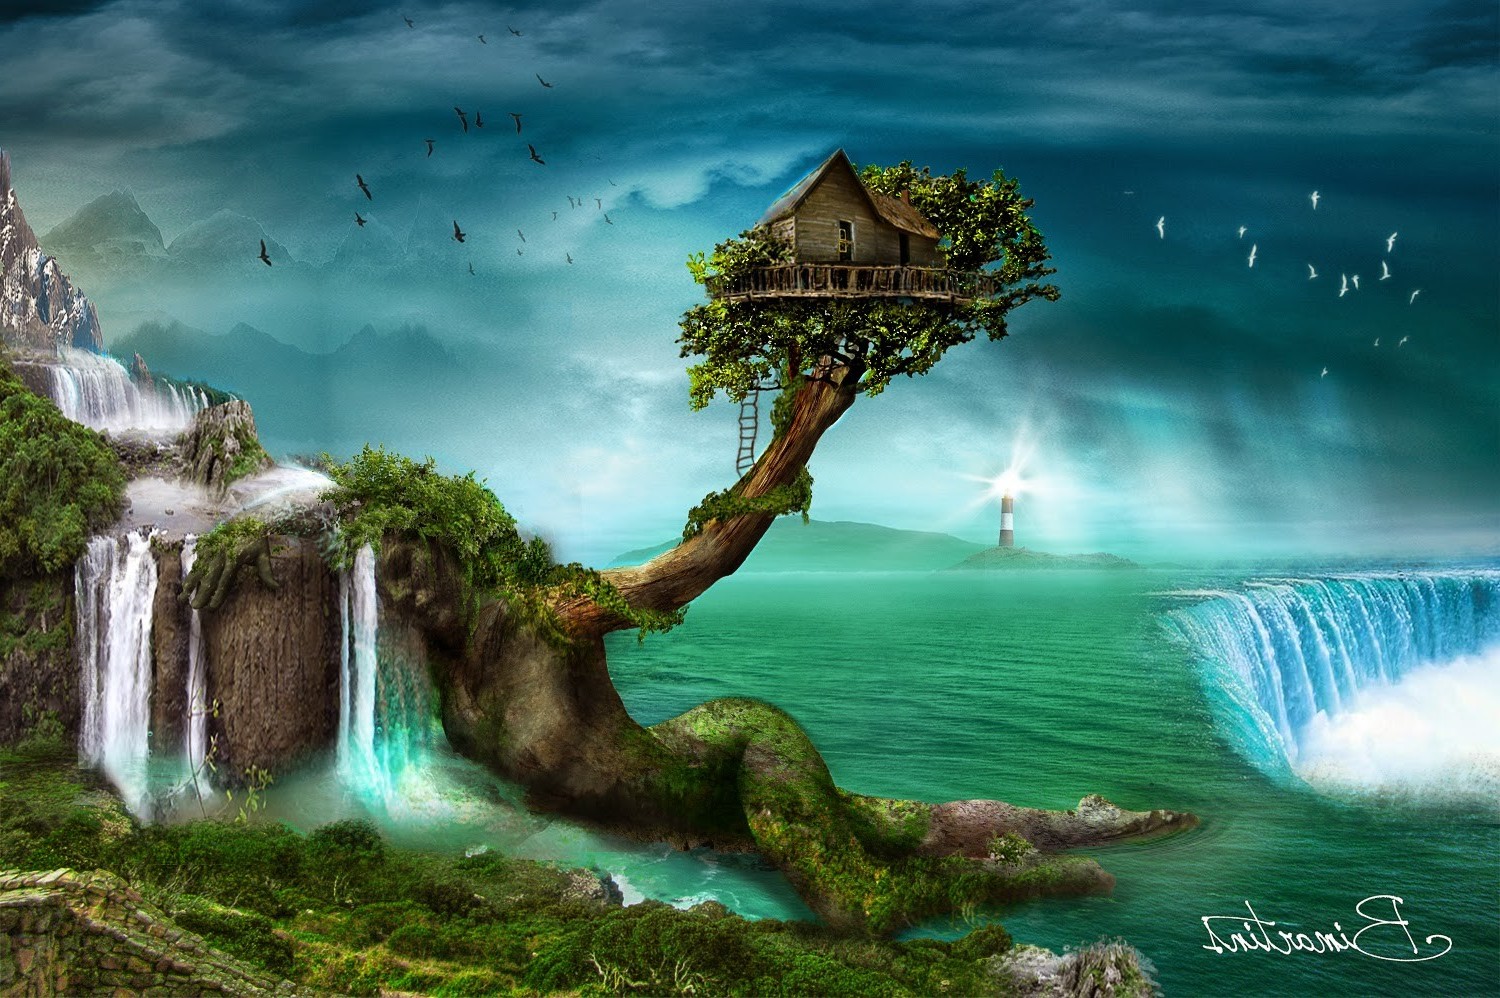 fantasy art artwork digital art pixelated science fiction mountains fall house open clothes birds water lighthouse trees Wallpaper